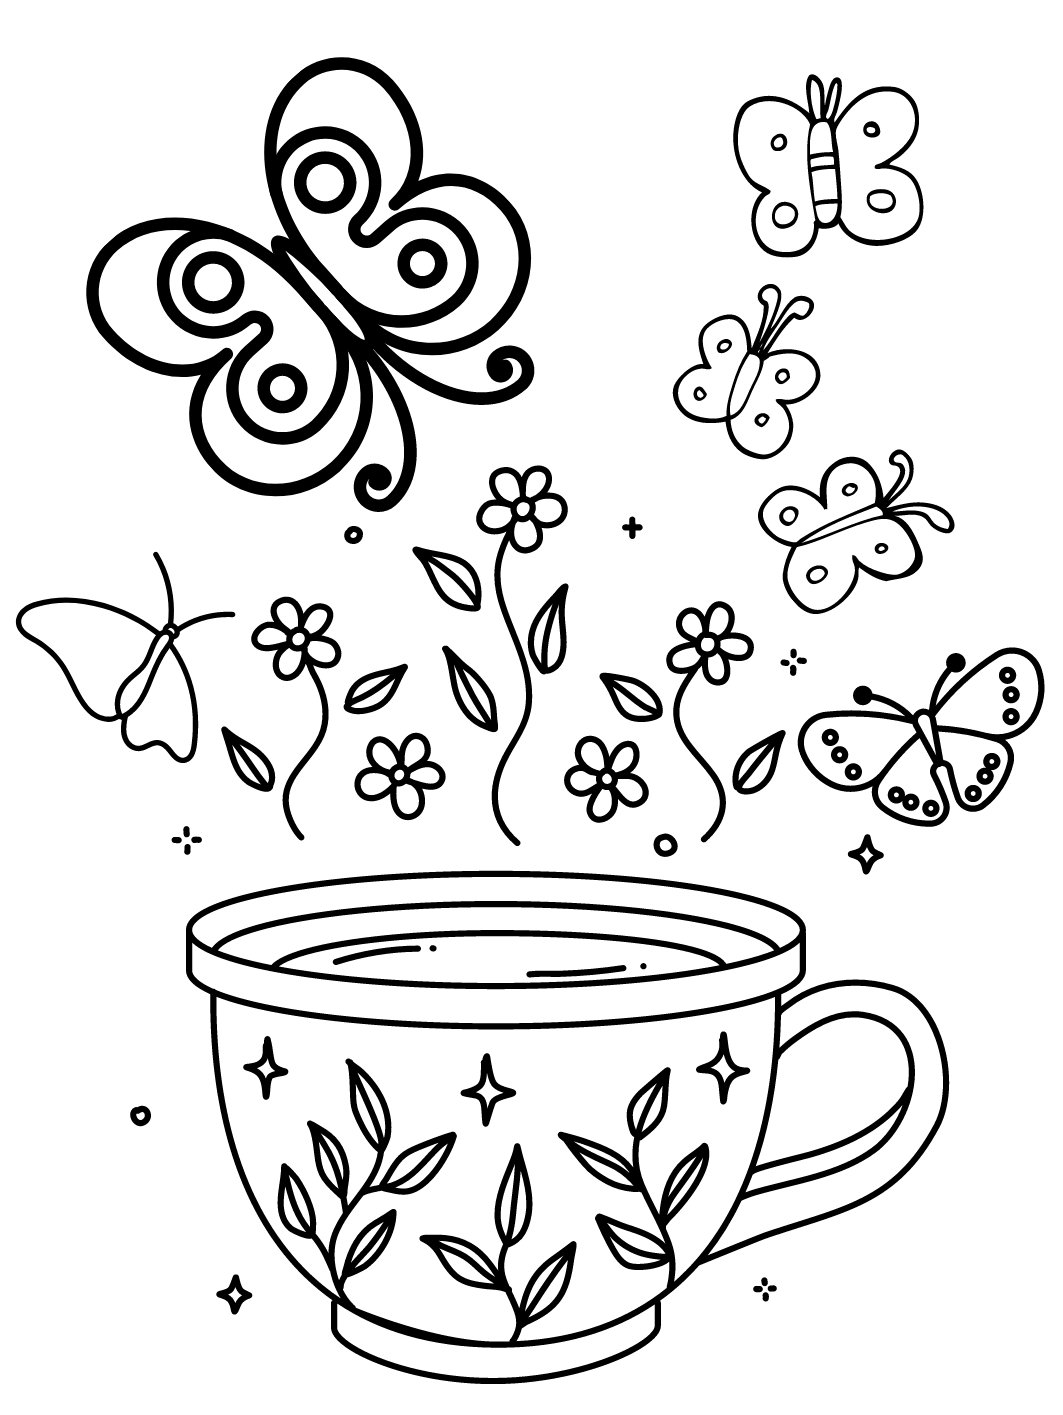 Butterflies with Cup of Tea Coloring Page